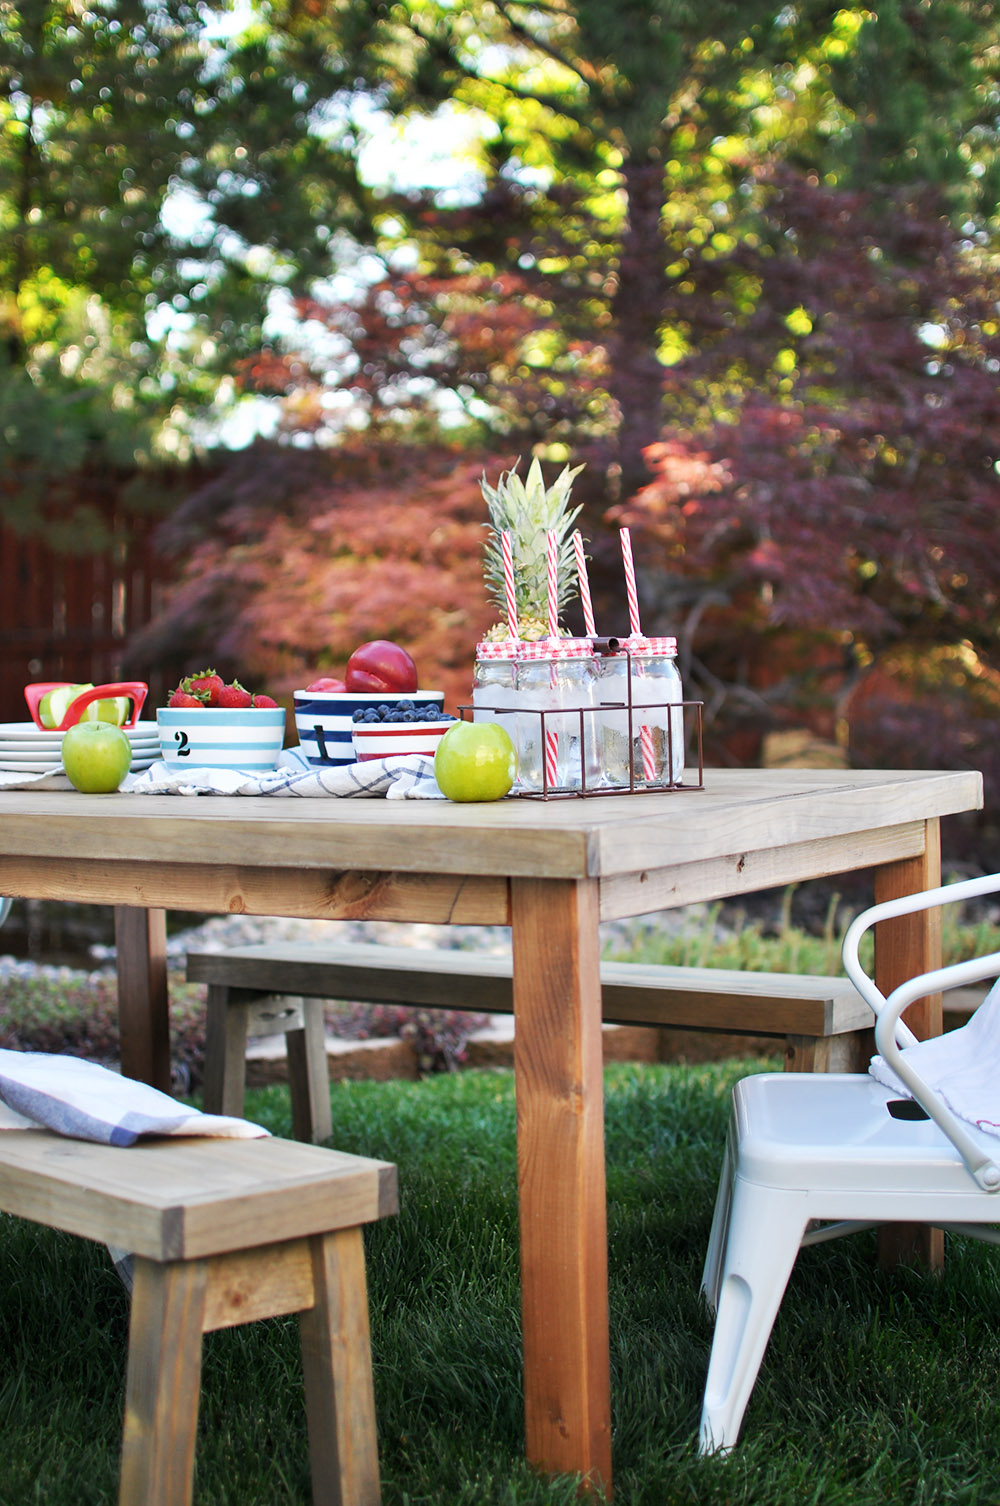 13 Summer DIY Projects